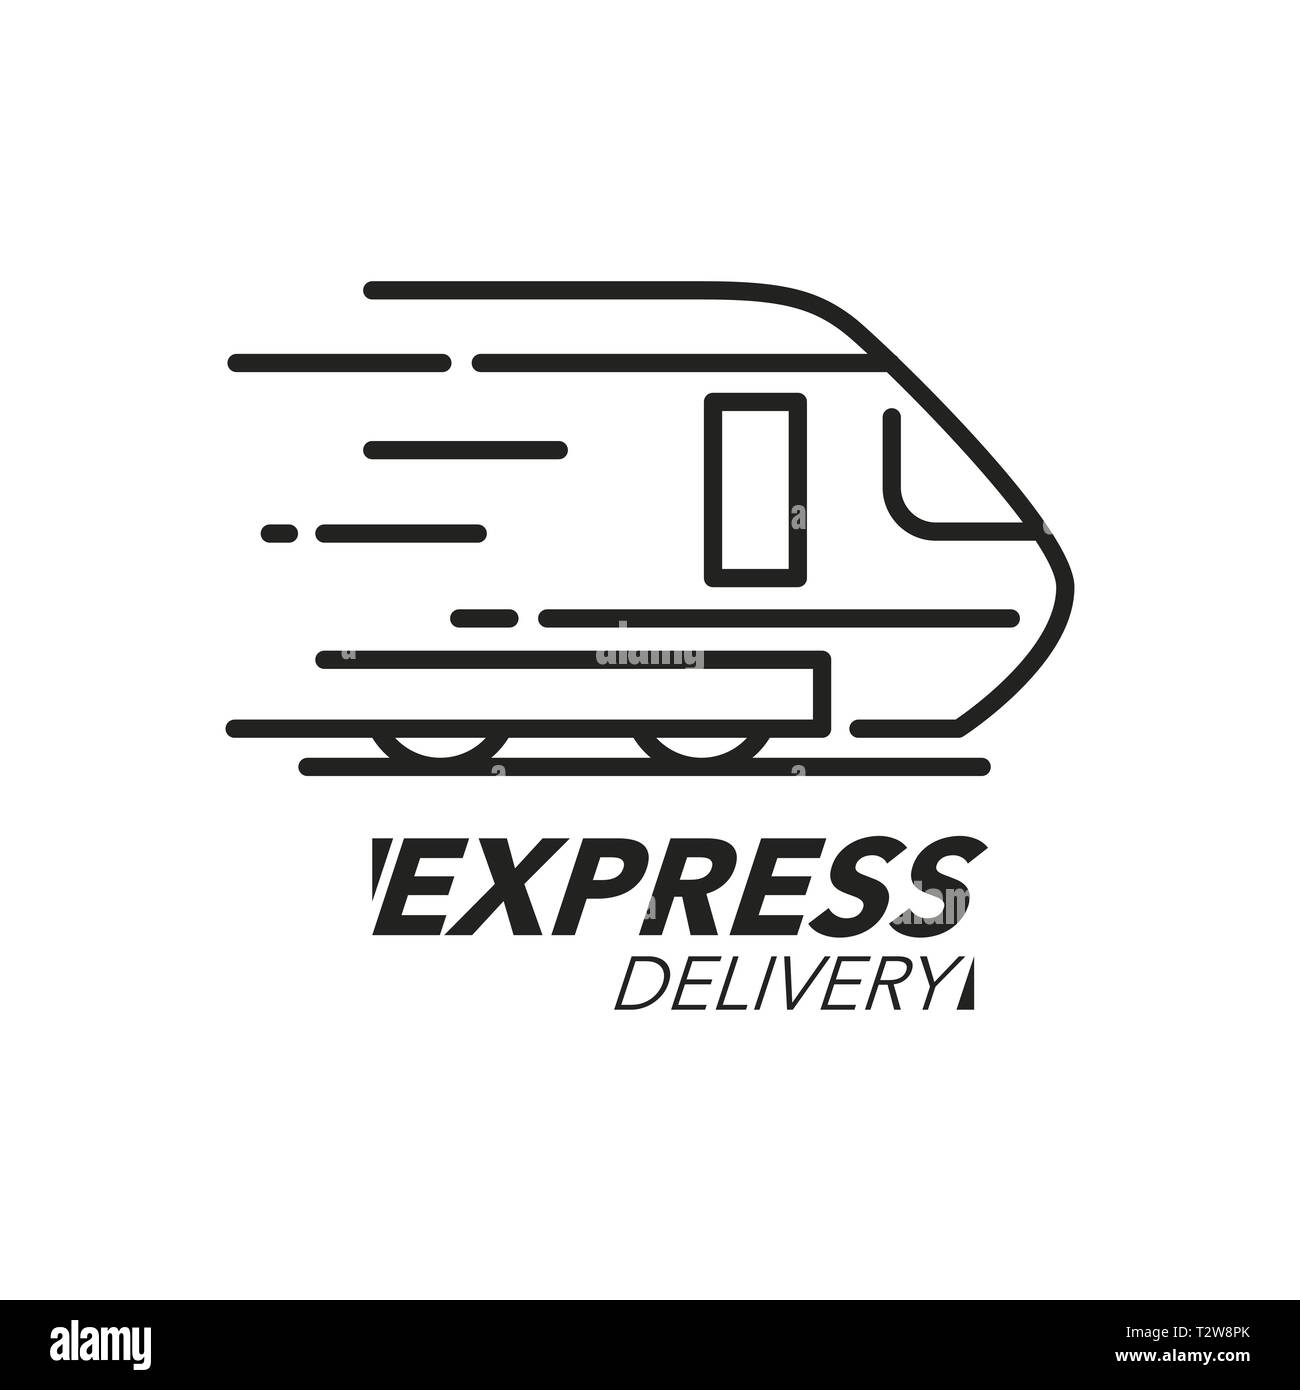 Express delivery icon concept. Train speed icon for service, order